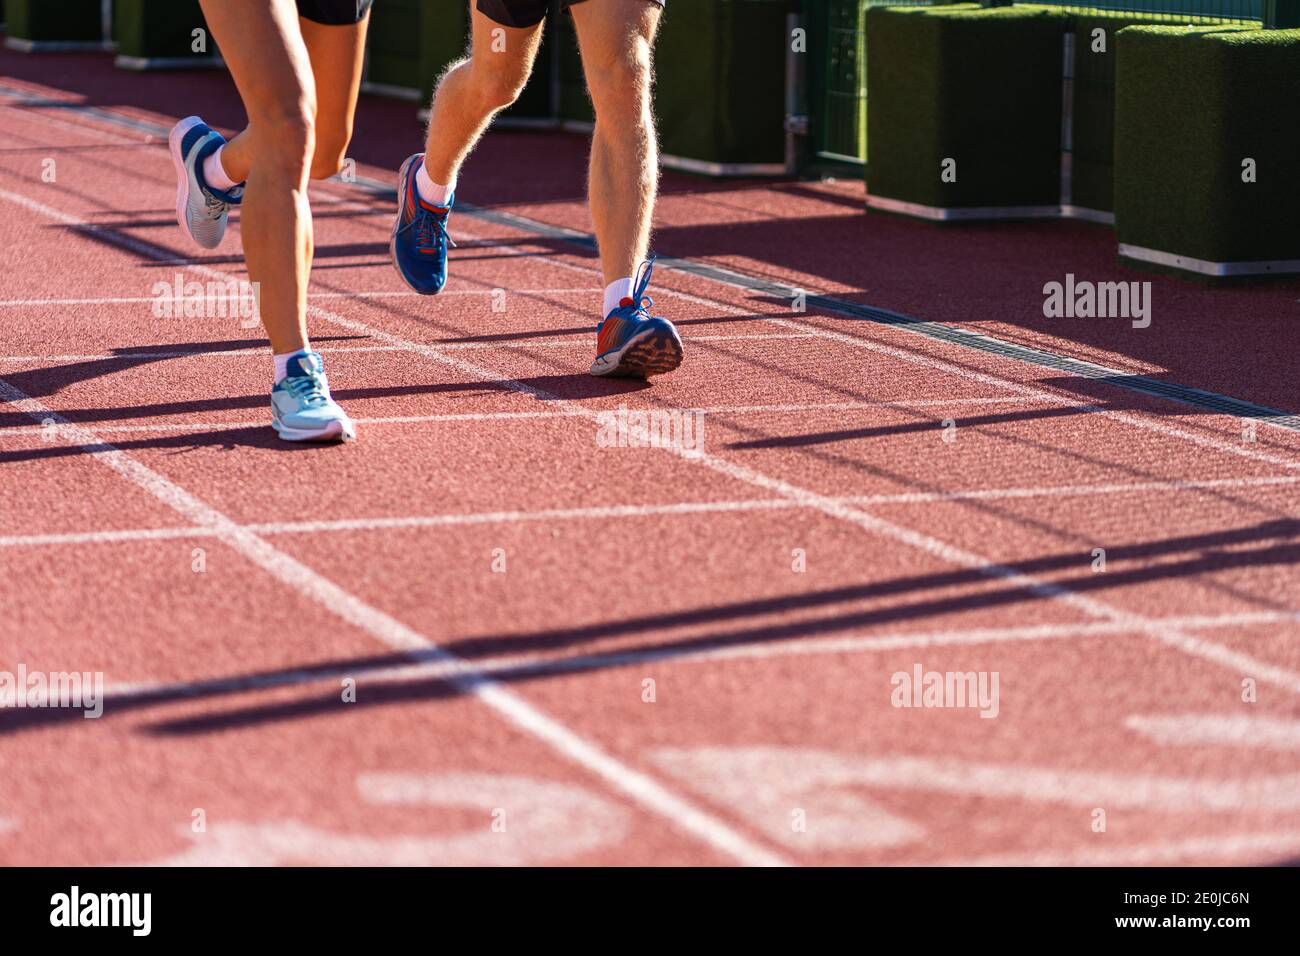 Runners legs jogging on a treadmill rubber stadium on sunny summer day, close up of running shoes. Sporty training cardio for weight loss success. Stock Photo